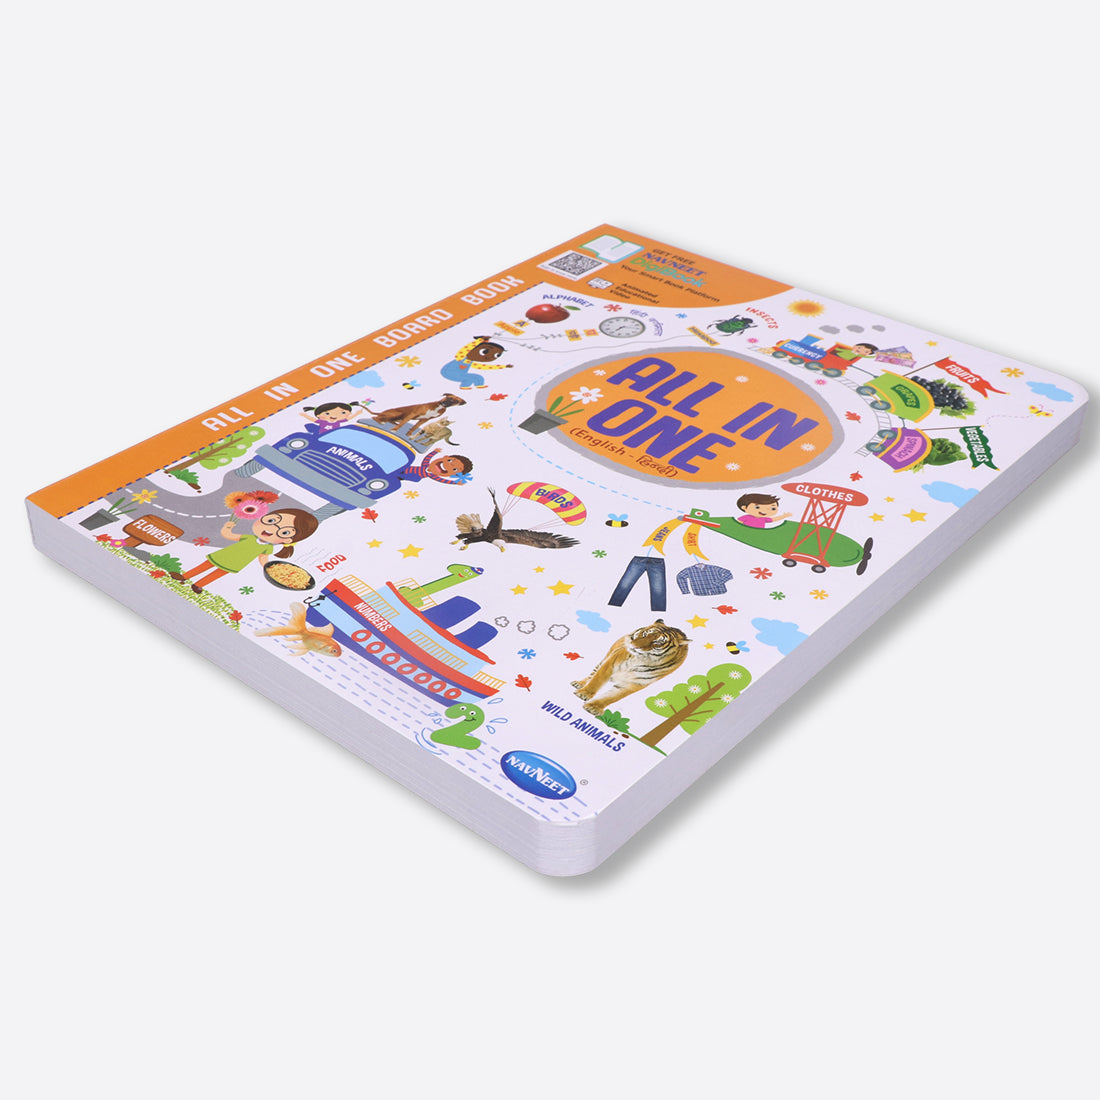 Navneet All In One Board Book (Hindi) - First Early Learning book for Kindergarten - Picture Board book for toddlers and babies - eBook - Animated interactive book - Audio Book